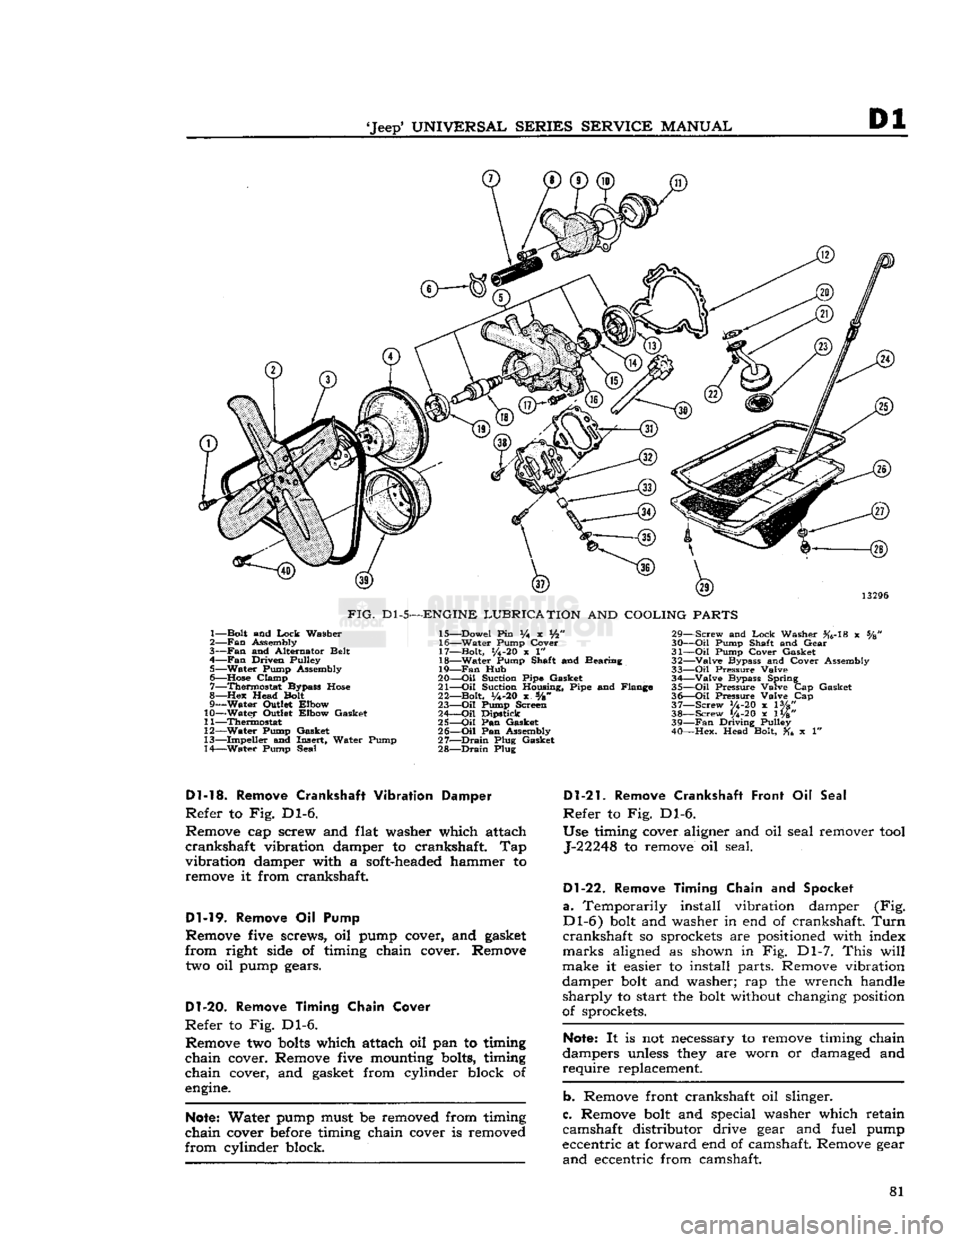 JEEP CJ 1953  Service Manual 
Jeep
 UNIVERSAL
 SERIES
 SERVICE
 MANUAL 

Dl 

13296 

FIG.
 Dl-5—ENGINE
 LUBRICATION
 AND
 COOLING
 PARTS 

1— Bolt and
 Lock
 Washer 
2—
 Fan
 Assembly 
3—
 Fan
 and Alternator Belt 
4�